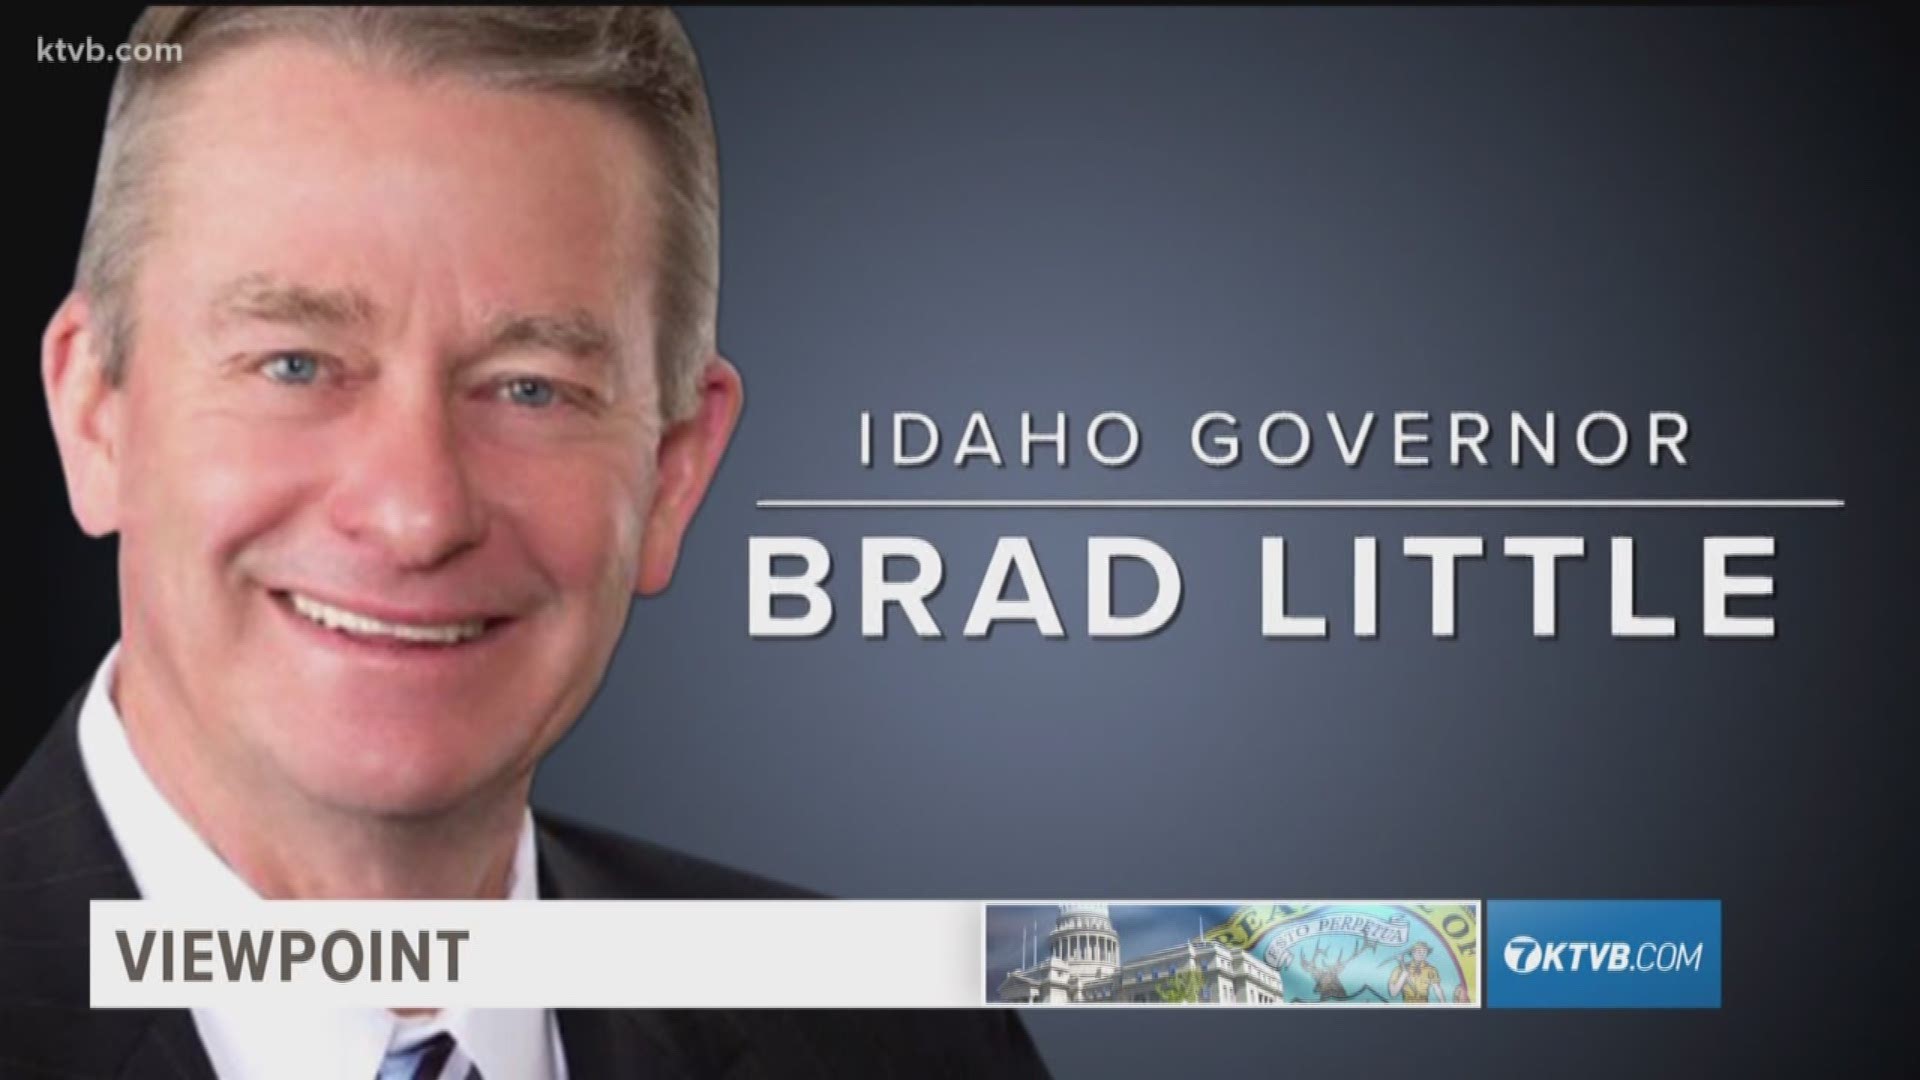 Governor Brad Little is Doug Petcash’s guest on Viewpoint this Sunday morning at 6:30 on KTVB. Governor Little discusses the ruling by the U.S. 9th Circuit Court of Appeals that Idaho must pay for a transgender inmate to have gender reassignment surgery. He explains why the state will appeal to the U.S. Supreme Court. He also talks about controversial Medicaid expansion work requirements, his education task force, and how the state is addressing the opioid epidemic.